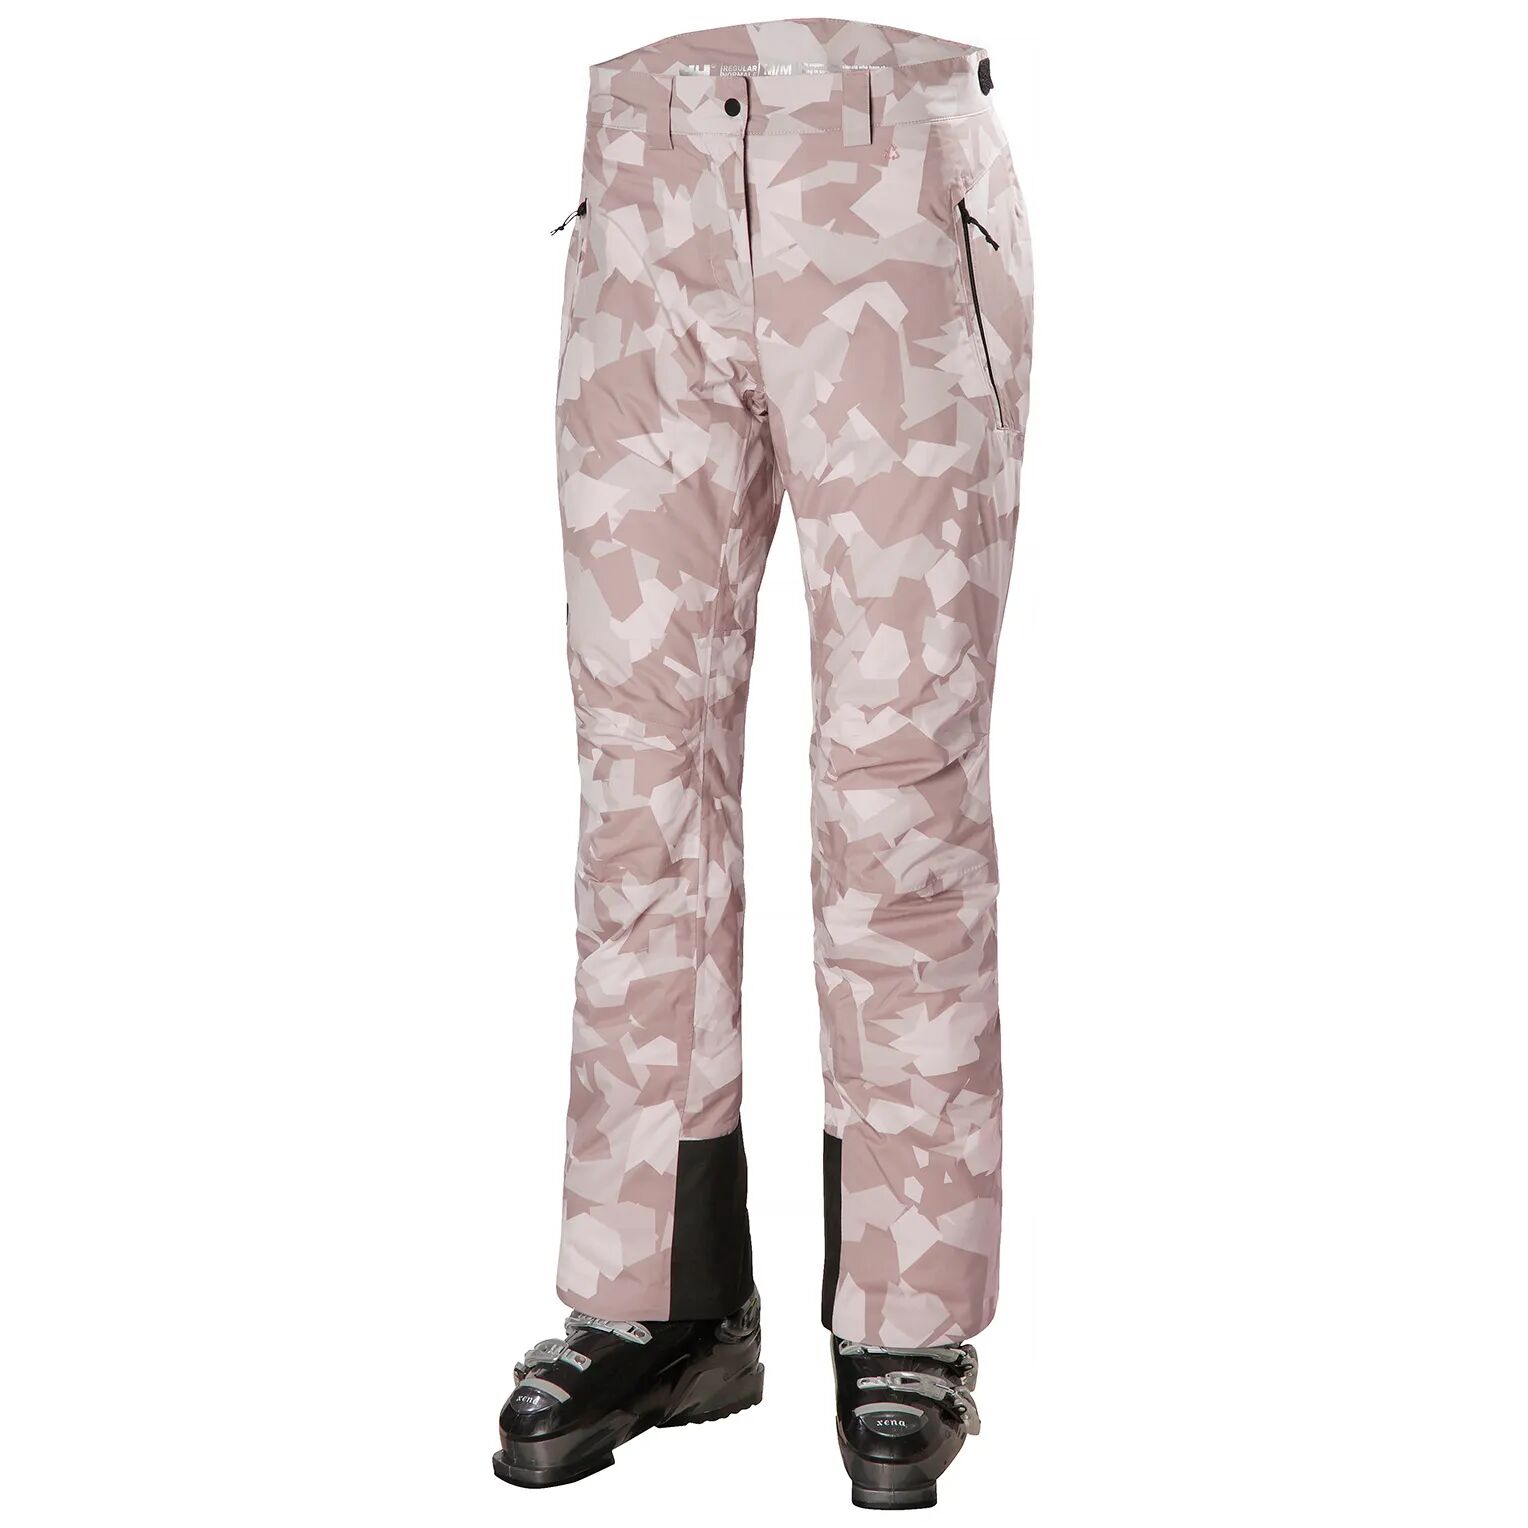 Helly Hansen Dame Snowstar Mono Material Trousers Skibukse Rosa XS